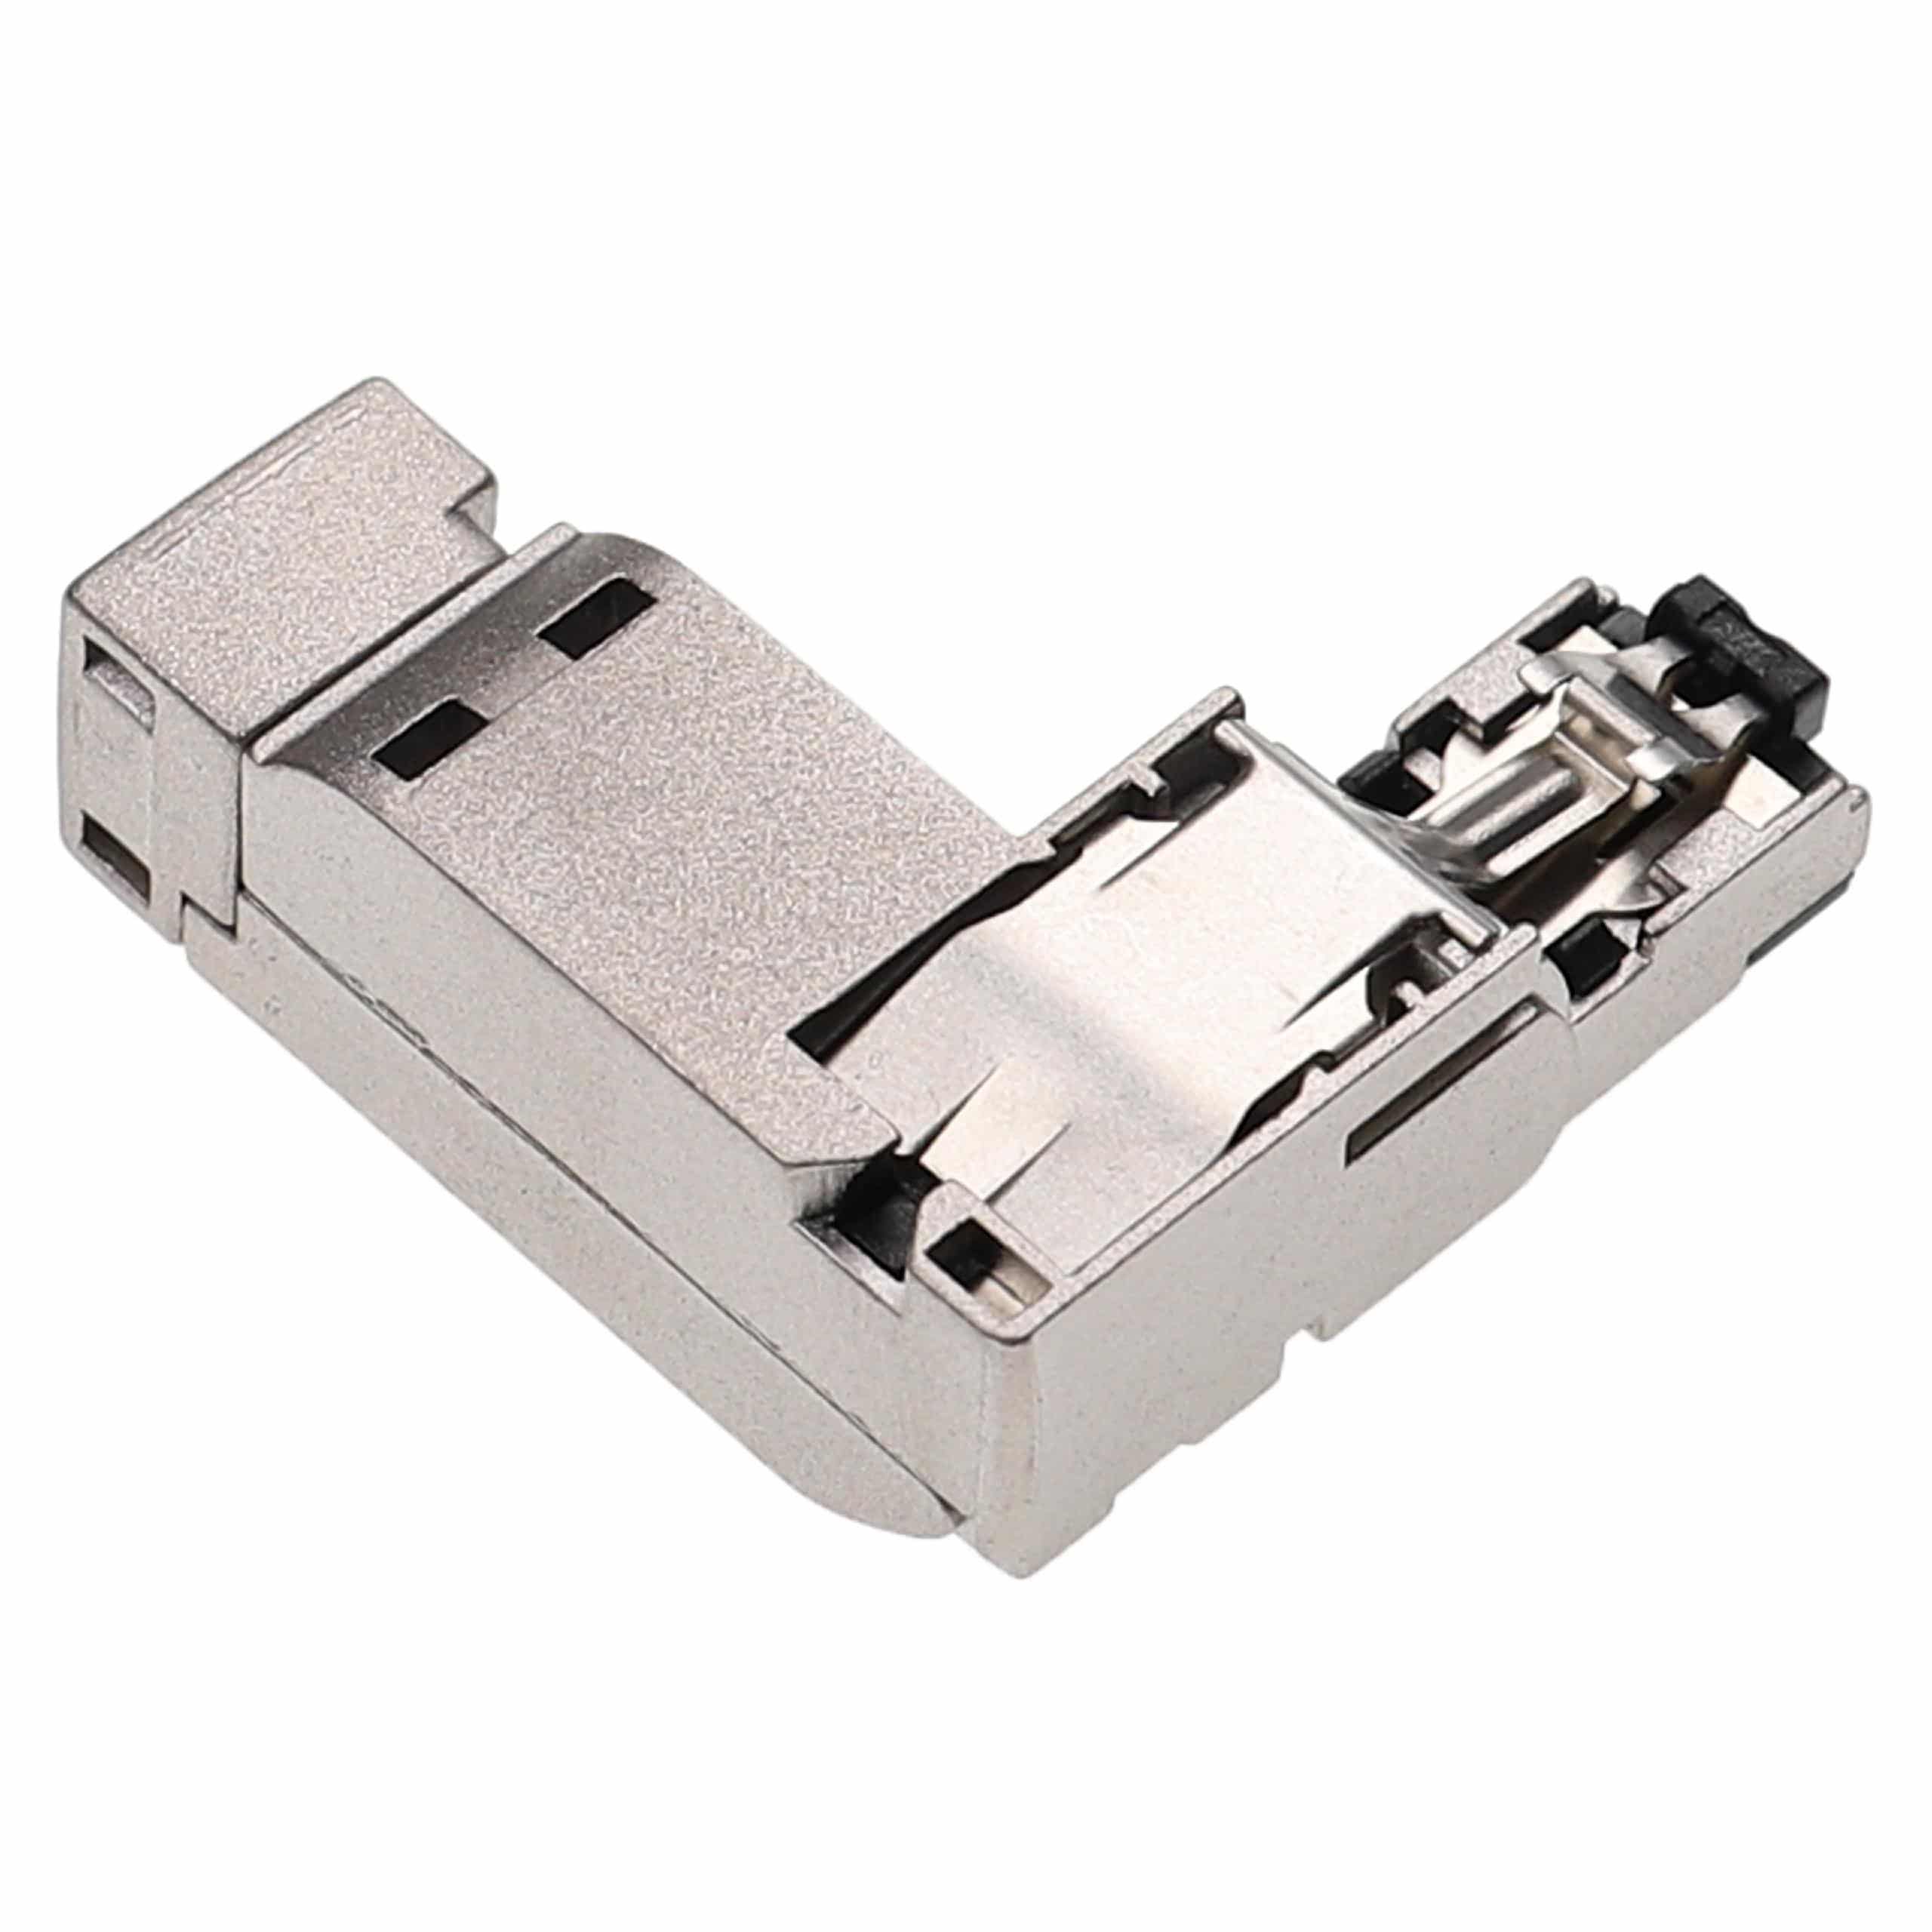 RJ45 Plug as Replacement for Siemens Profinet 6GK1901-1BB10-2AA0 Ethernet Cable - Connector Plug, angled